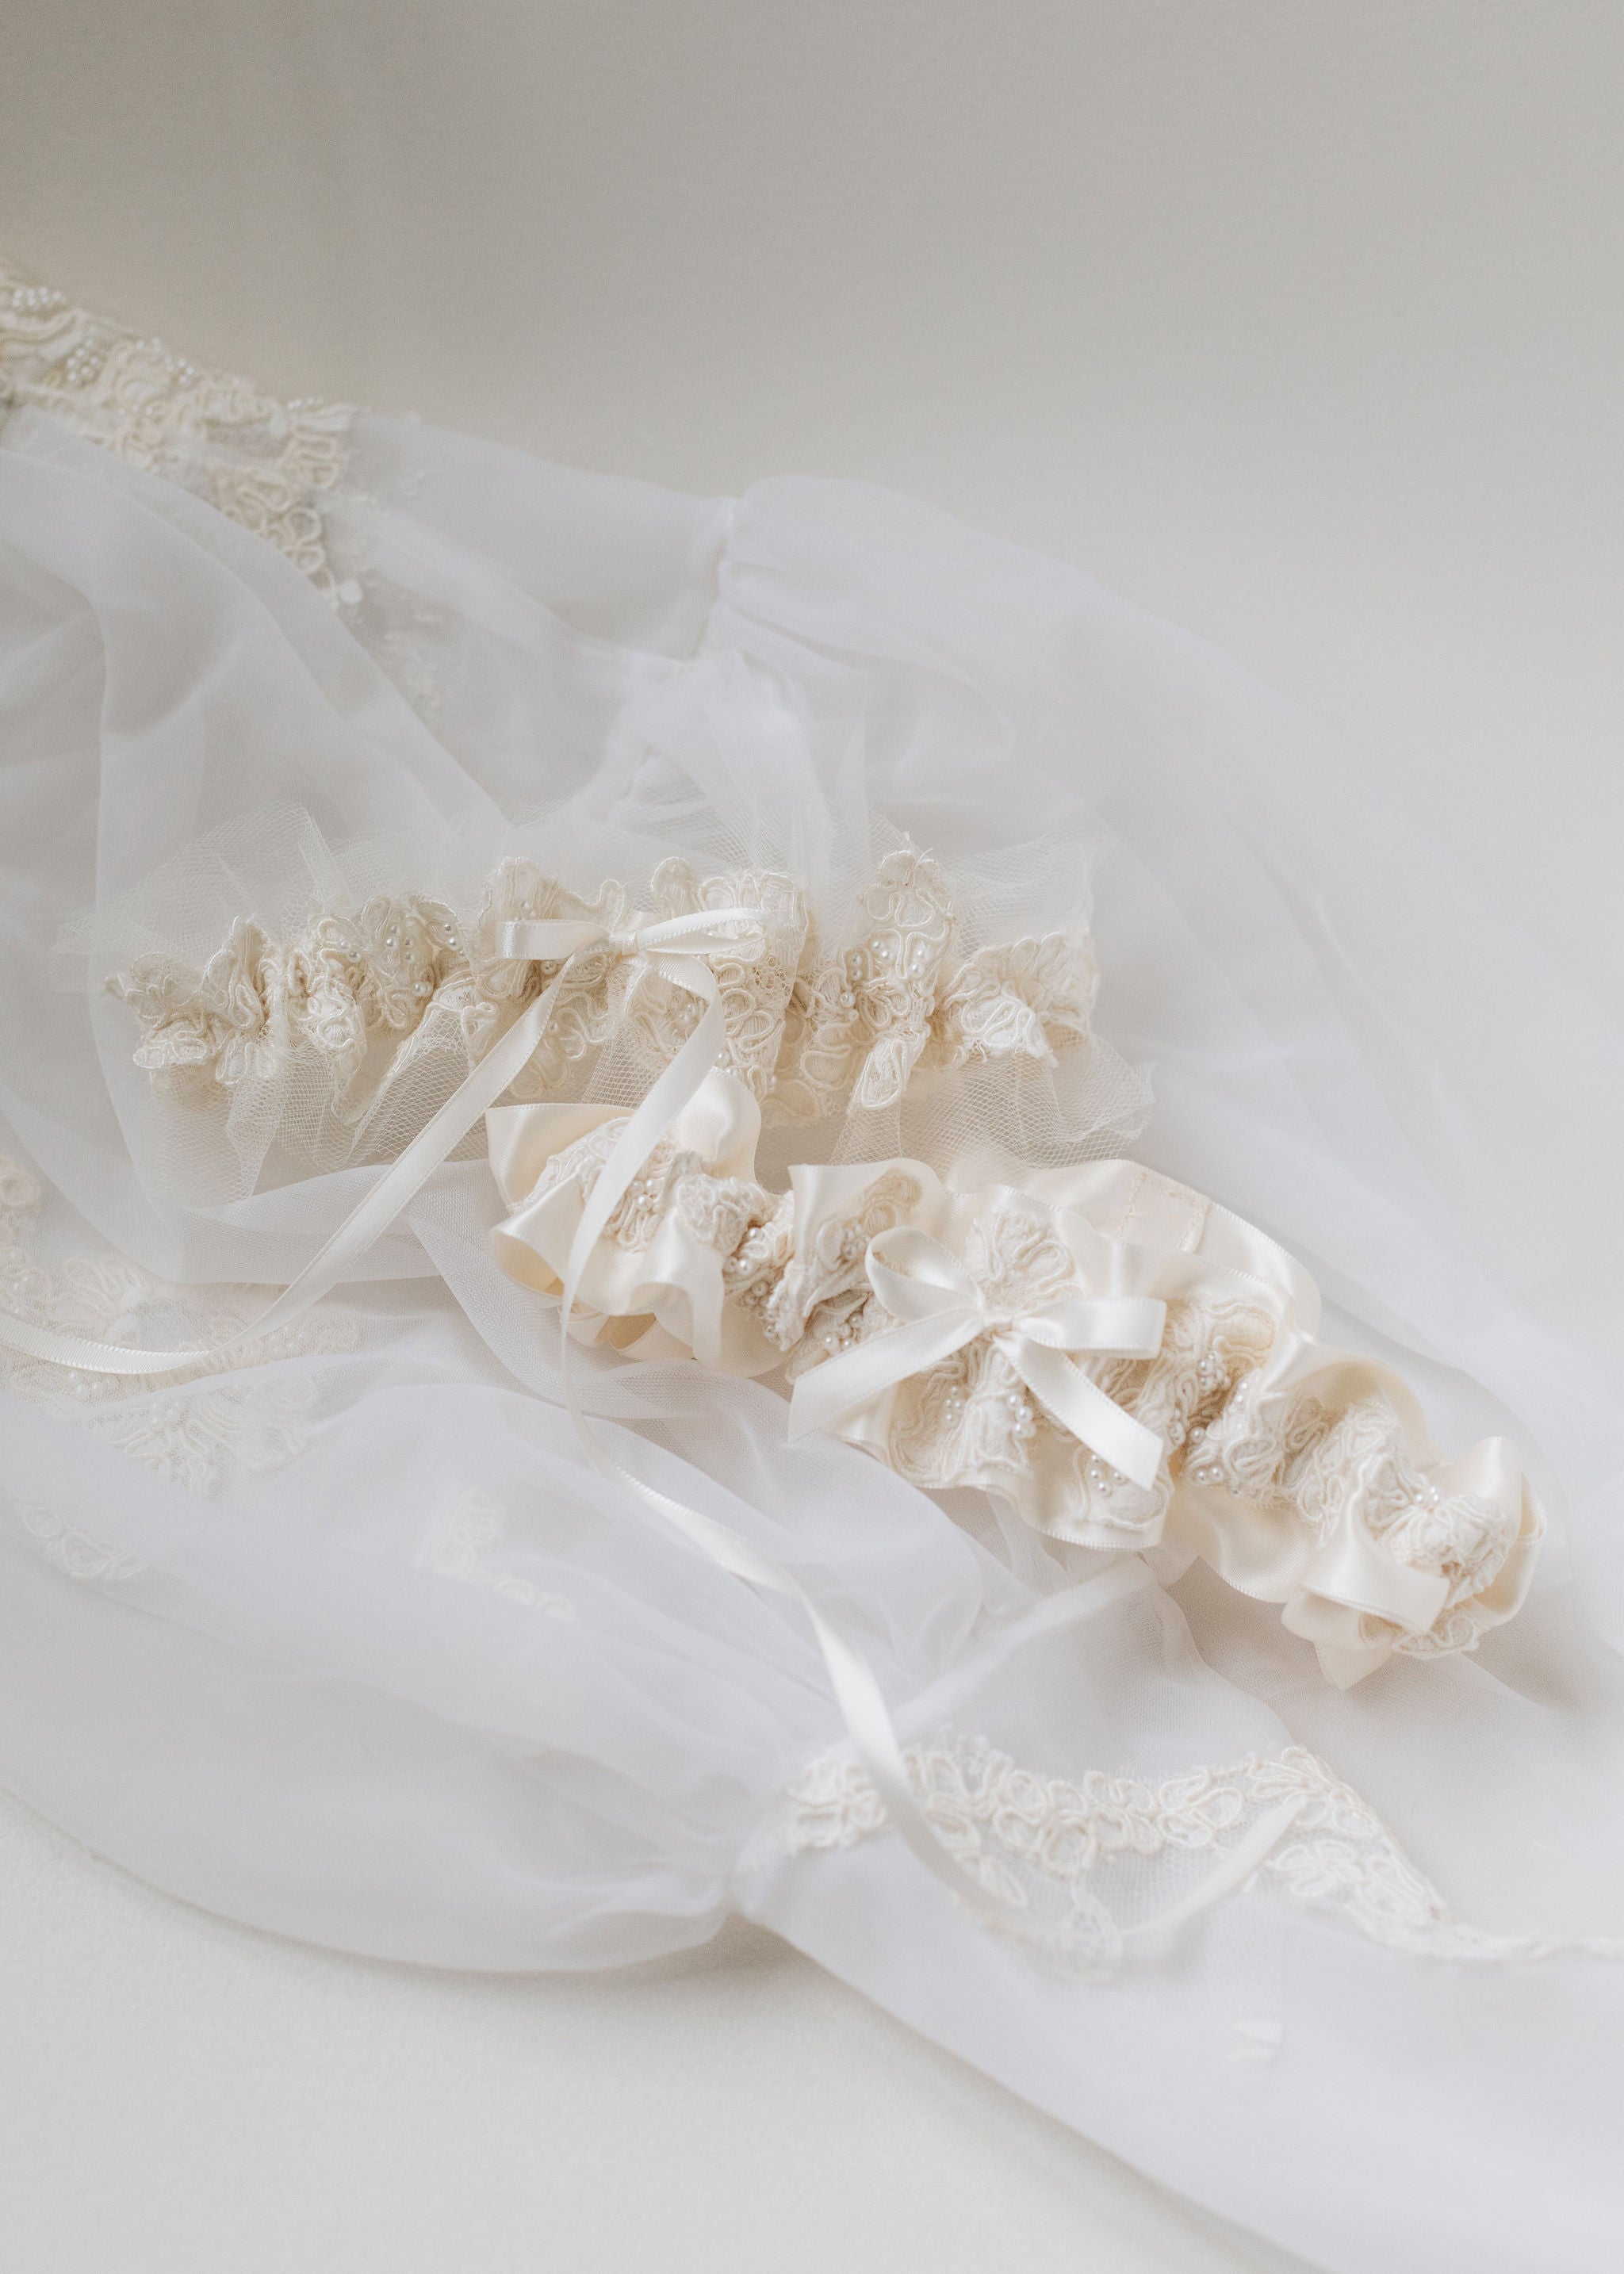 what to do with mother's wedding dress - wedding garters w pearls & lace handmade from the dress sleeves by expert bridal heirloom designer, The Garter Girl